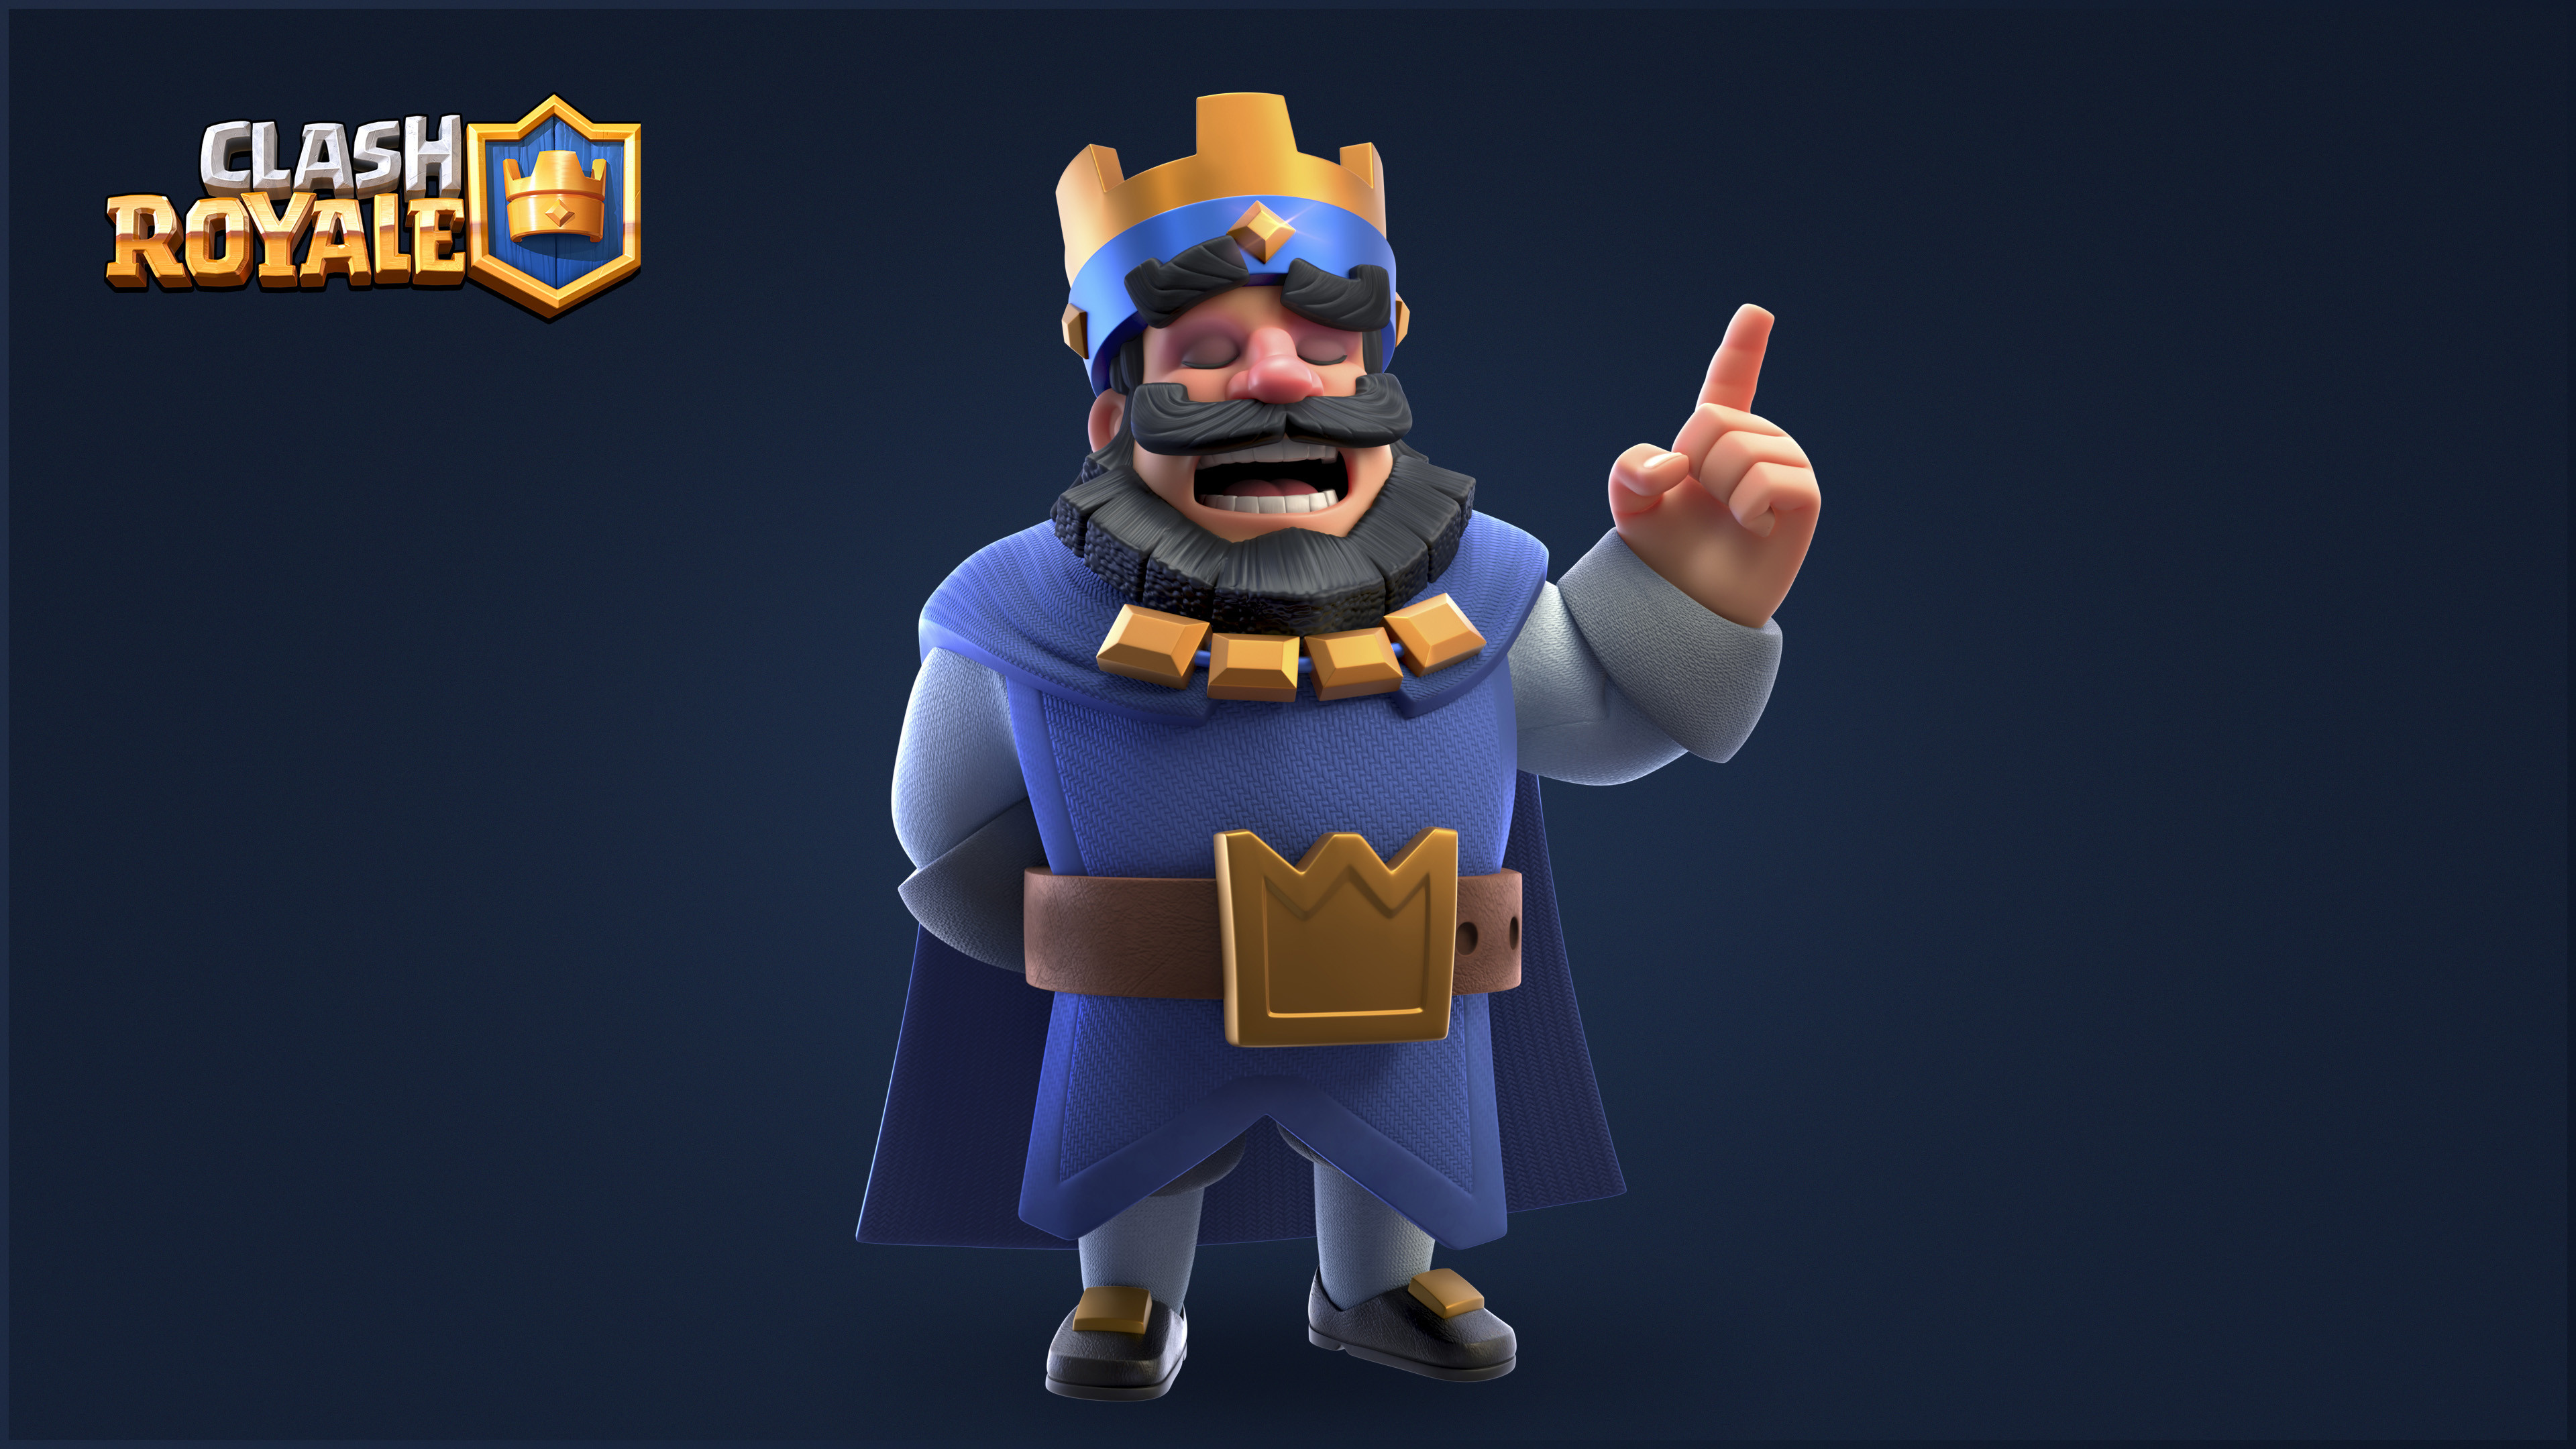 Clash Royale Victory Animation by Paul on Dribbble